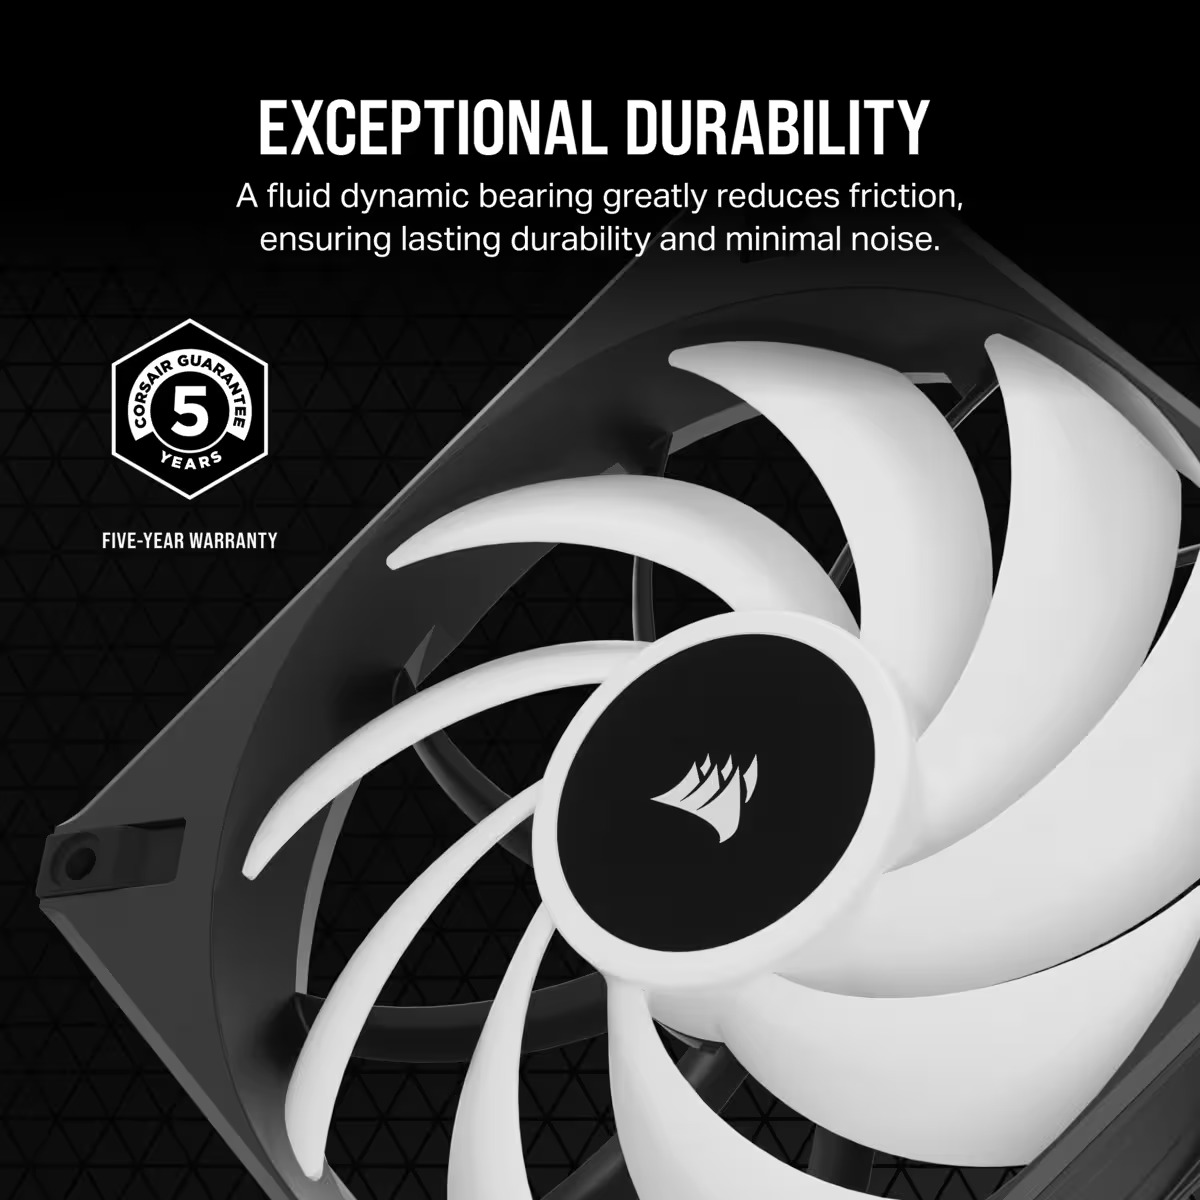 CORSAIR ICUE AF140 RGB ELITE 140MM PWM FAN WITH AIRGUIDE - SINGLE PACK